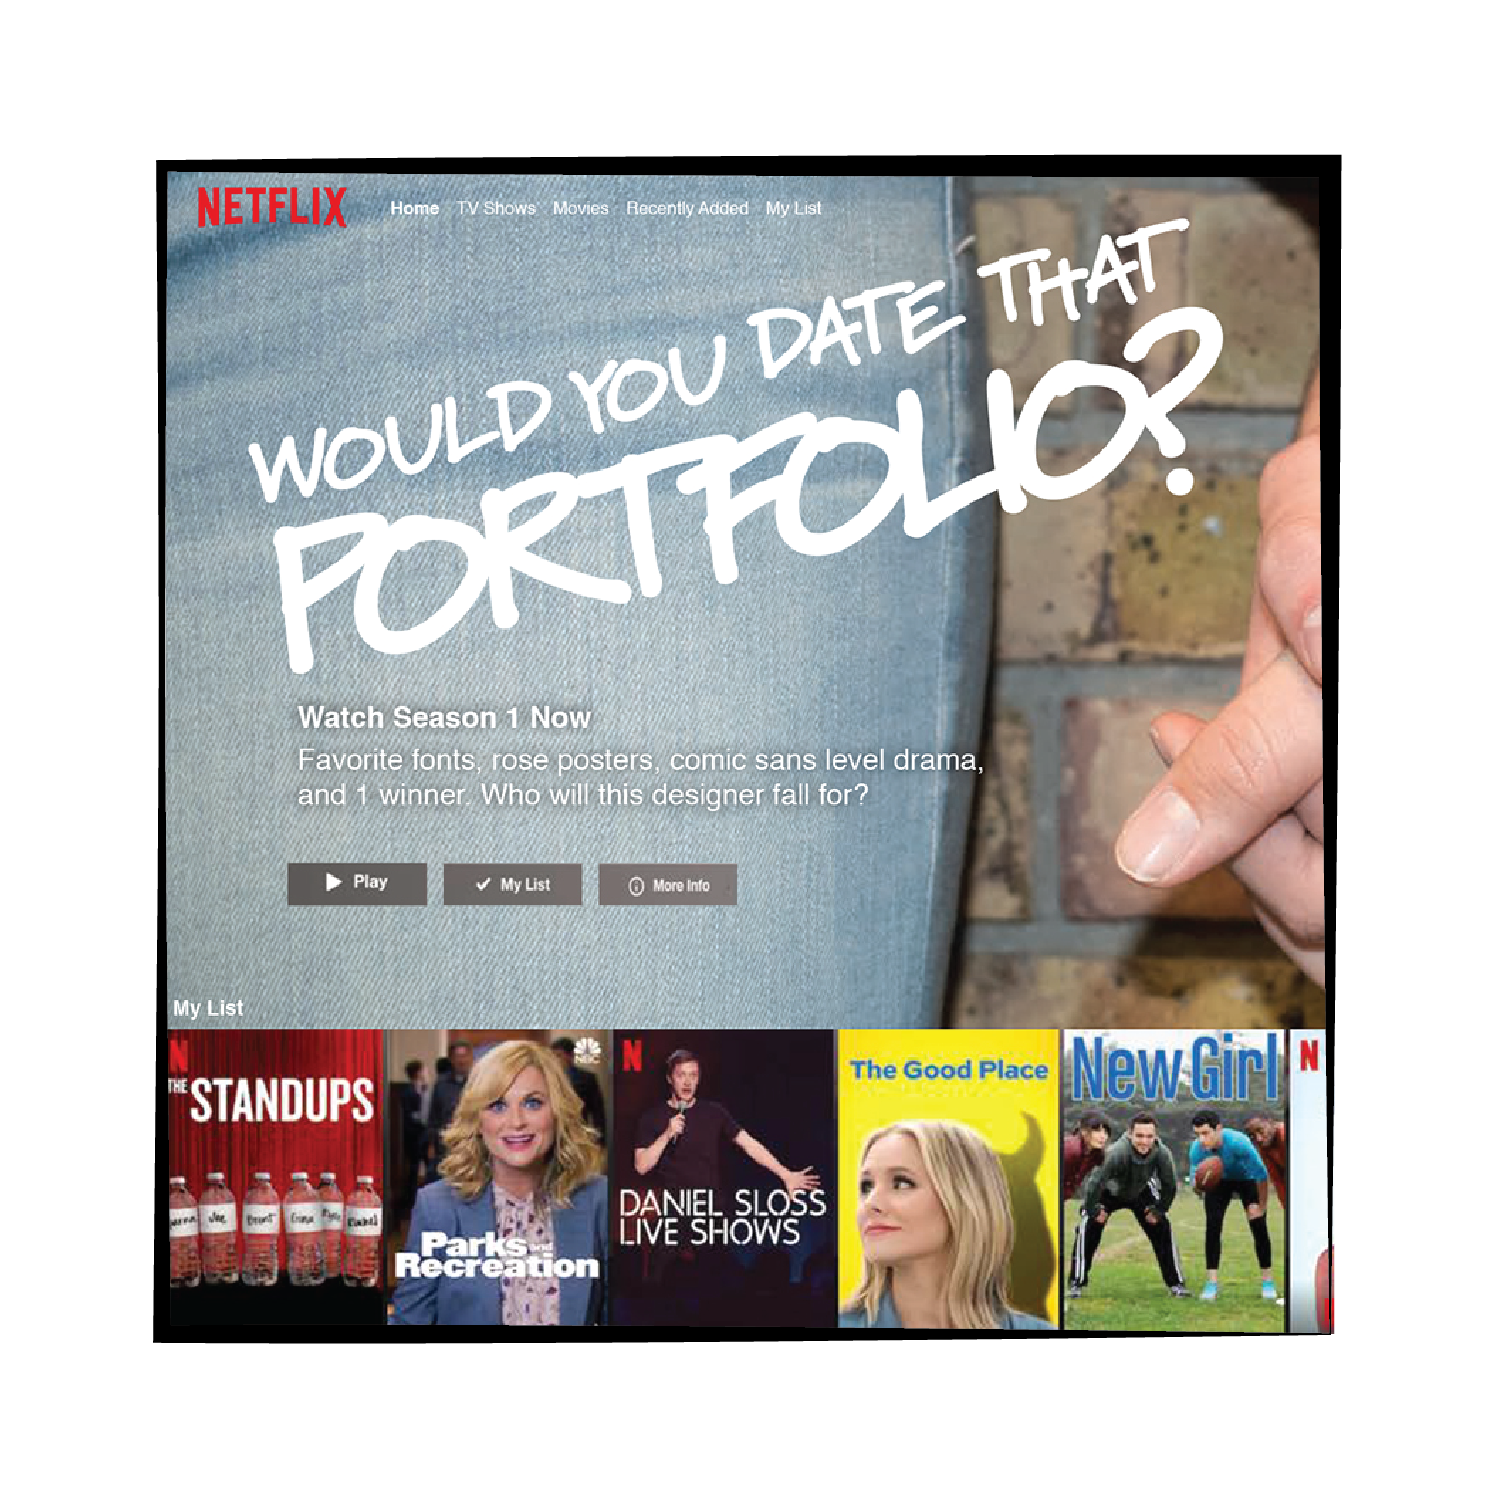 Would You Date That Portfolio?